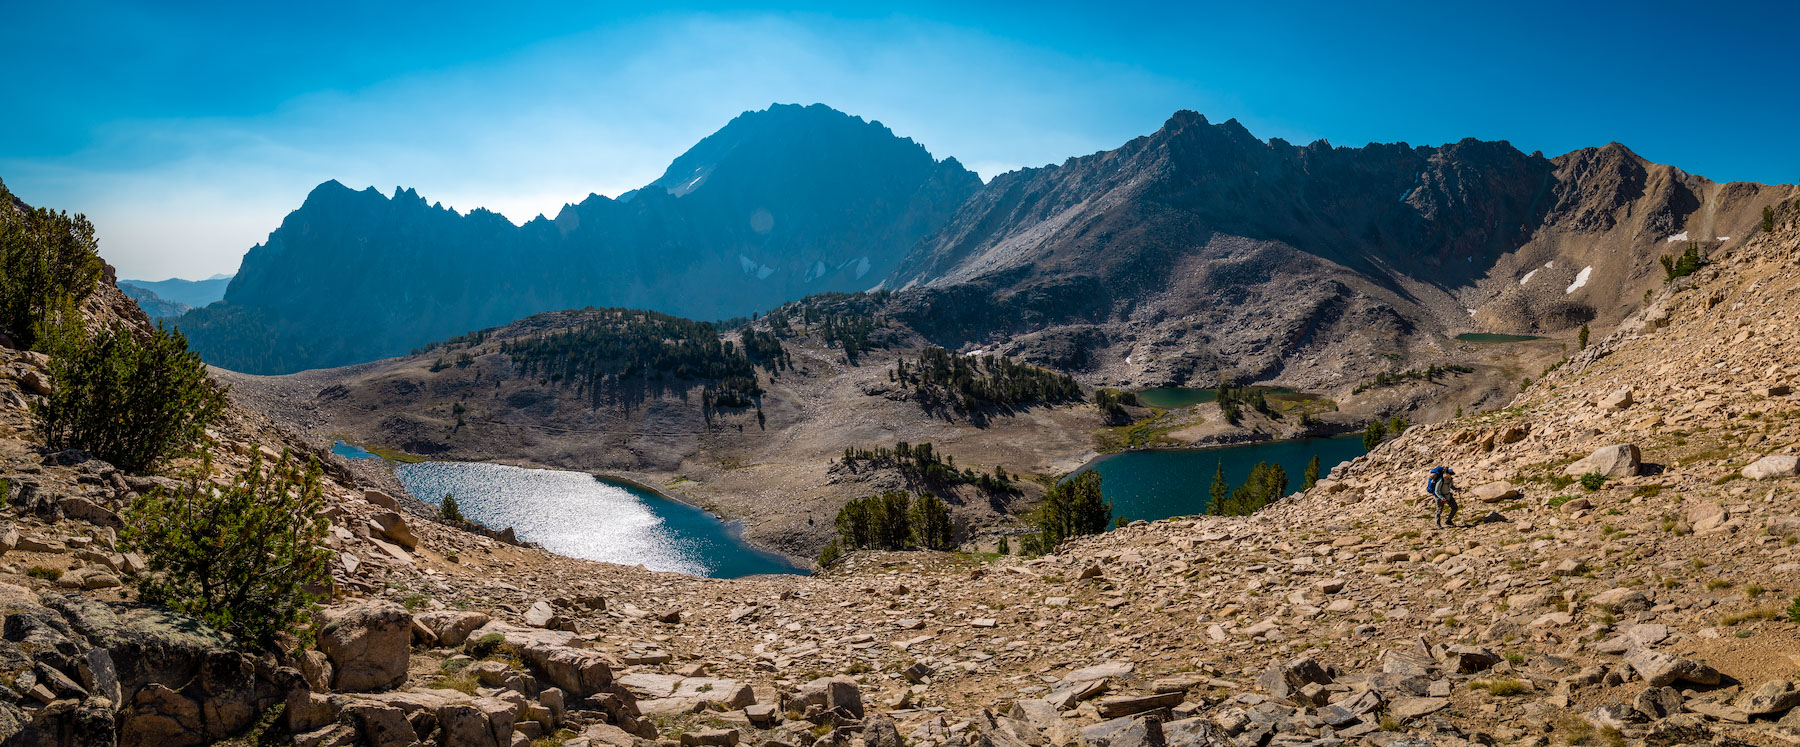 The Four Lakes Basin in Idaho's White Clouds Mountains